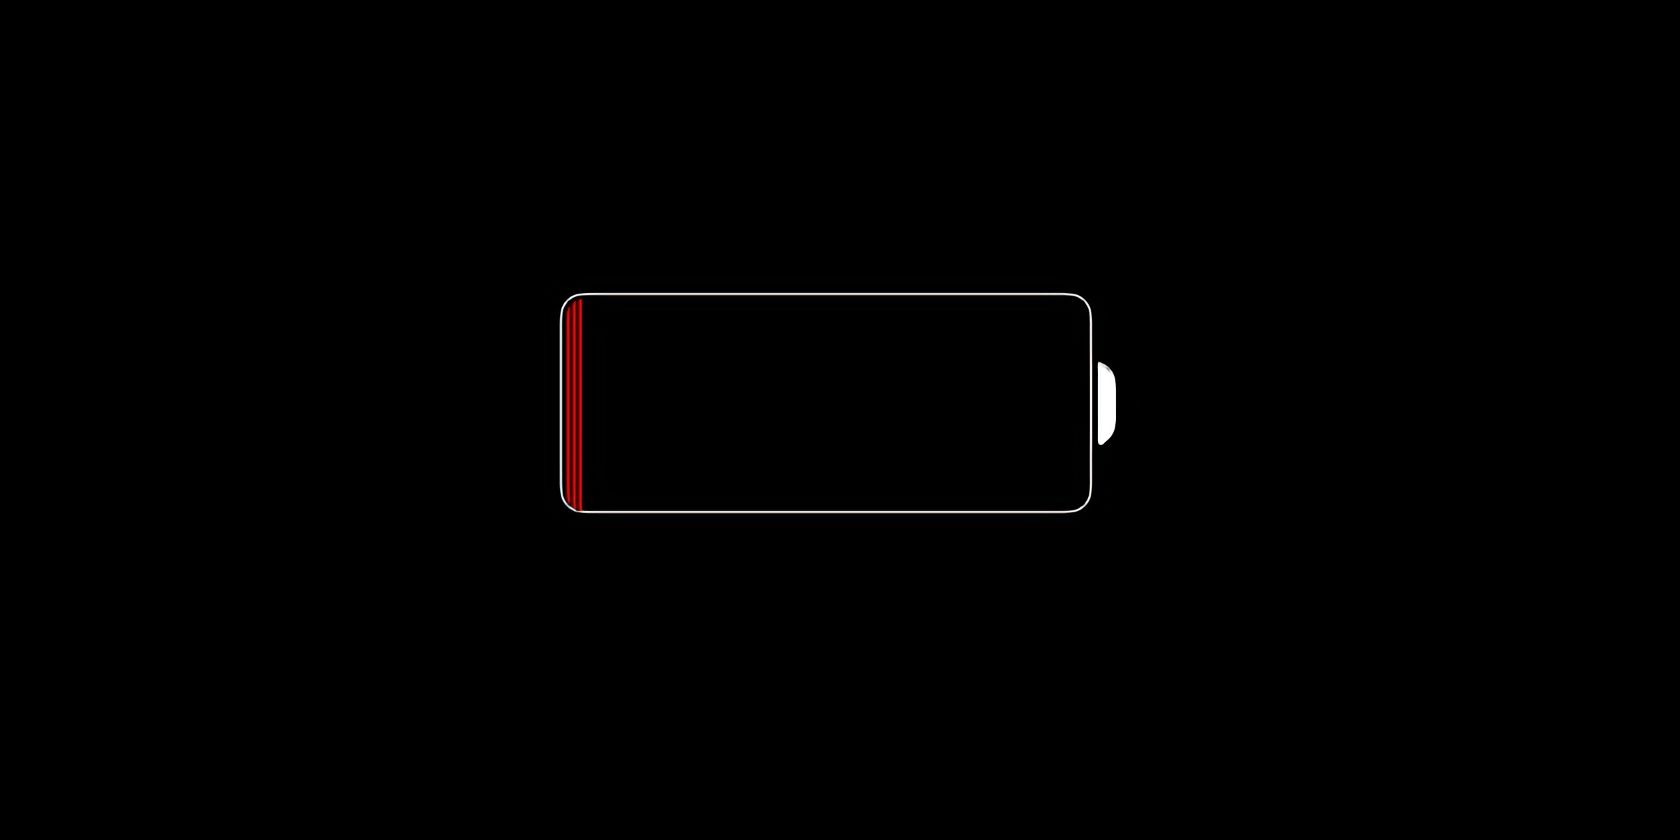 A huge iPhone battery icon showing low charge, set against a solid black background